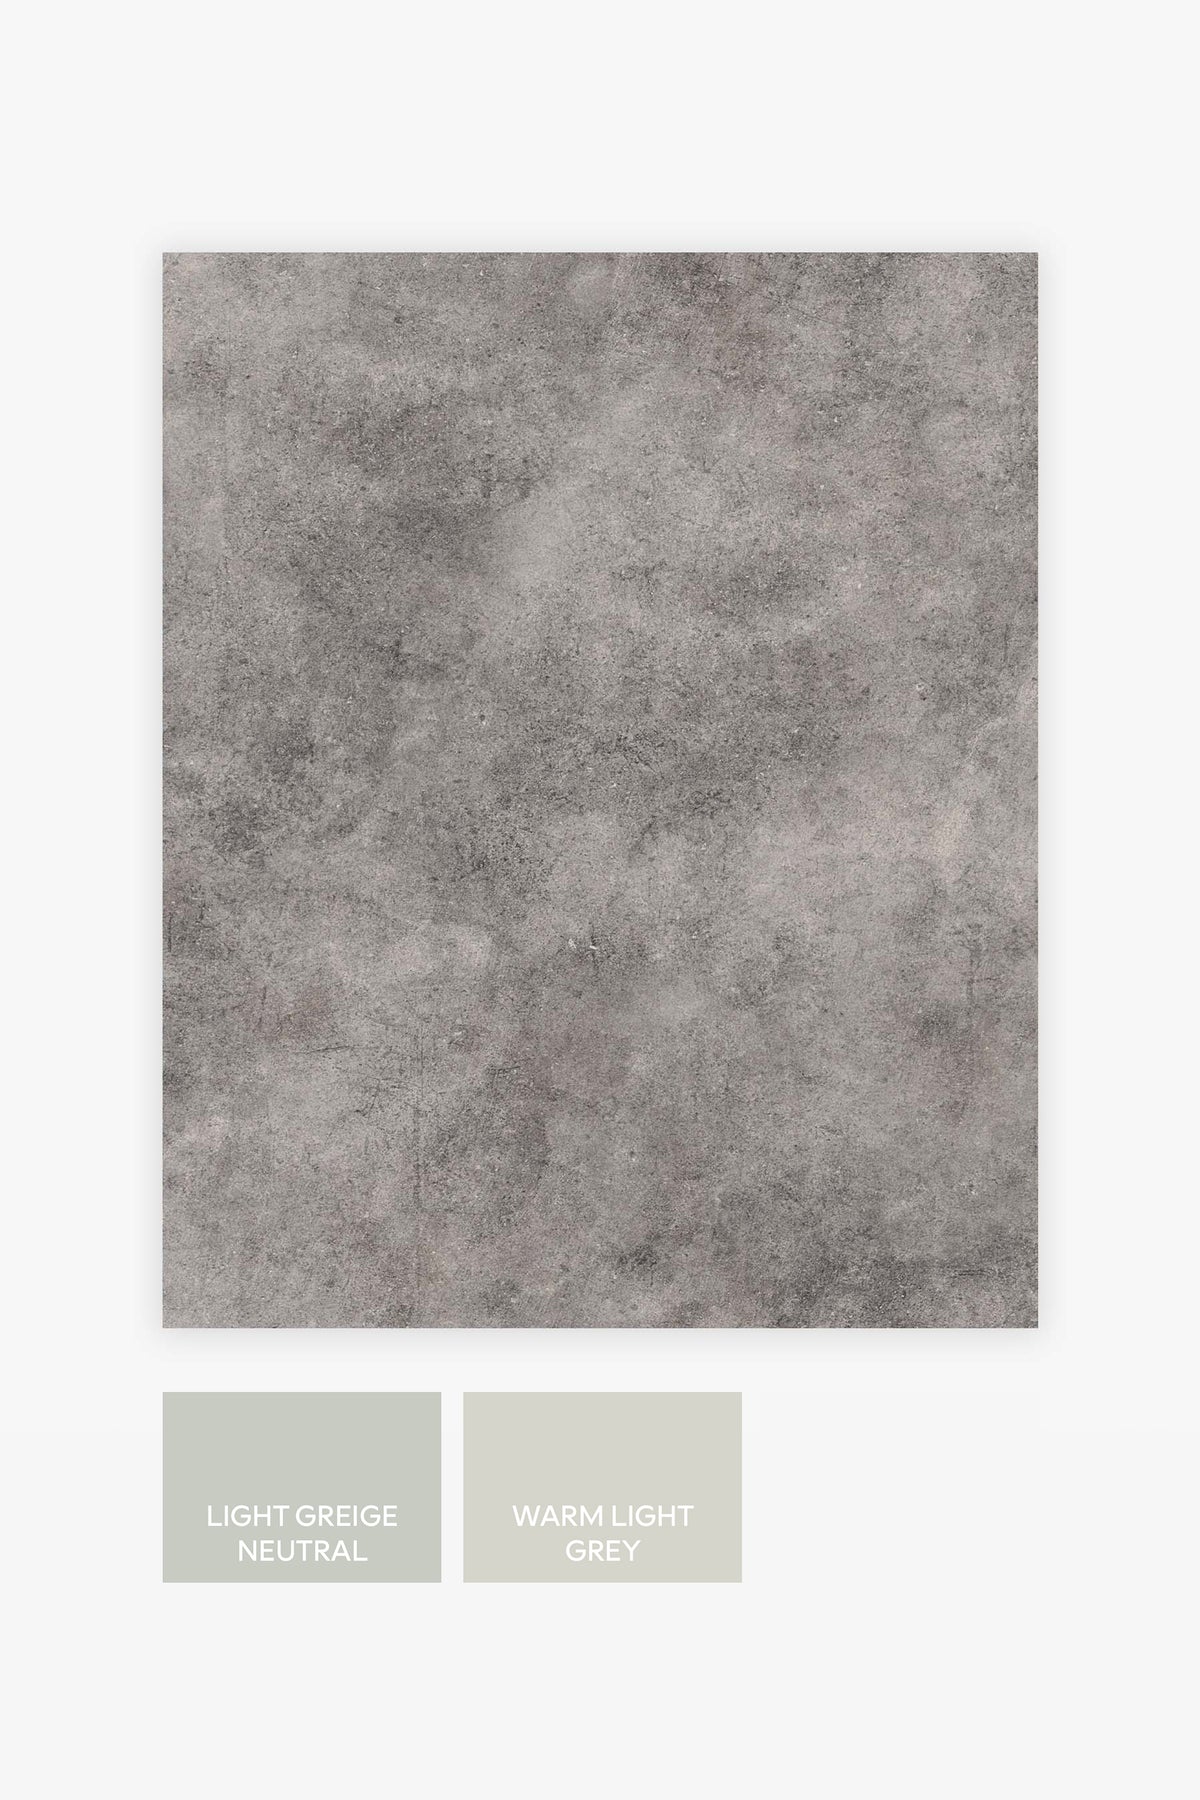 Plaster Abstract Grey